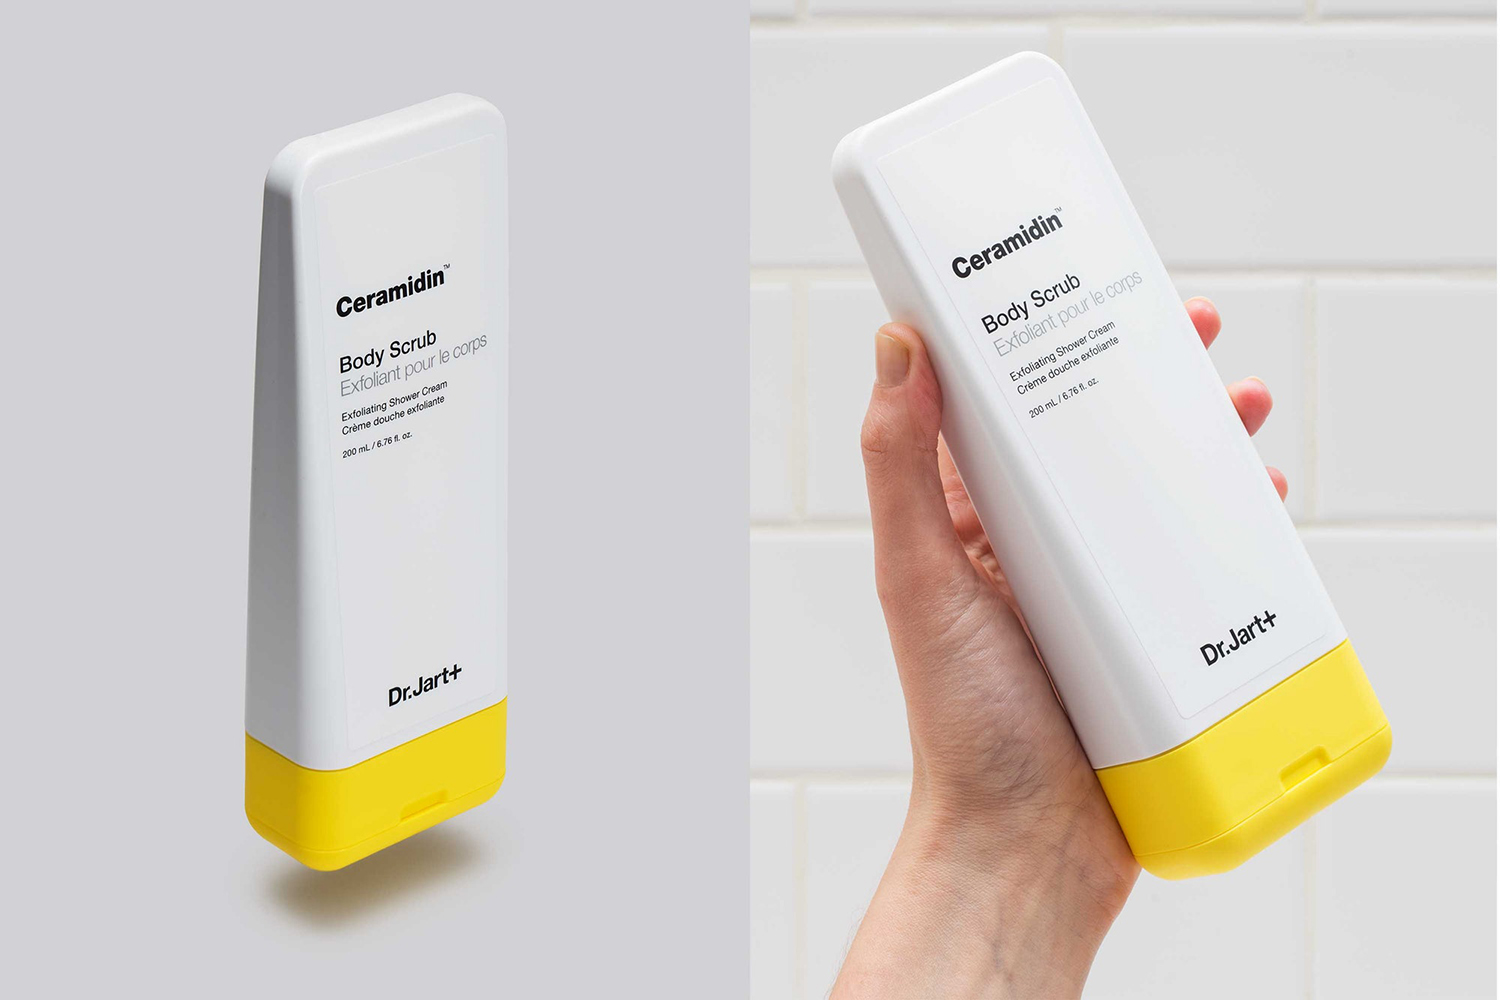 Packaging and graphic identity by Pentagram partner Paula Scher for specialist skincare brand Dr Jart+